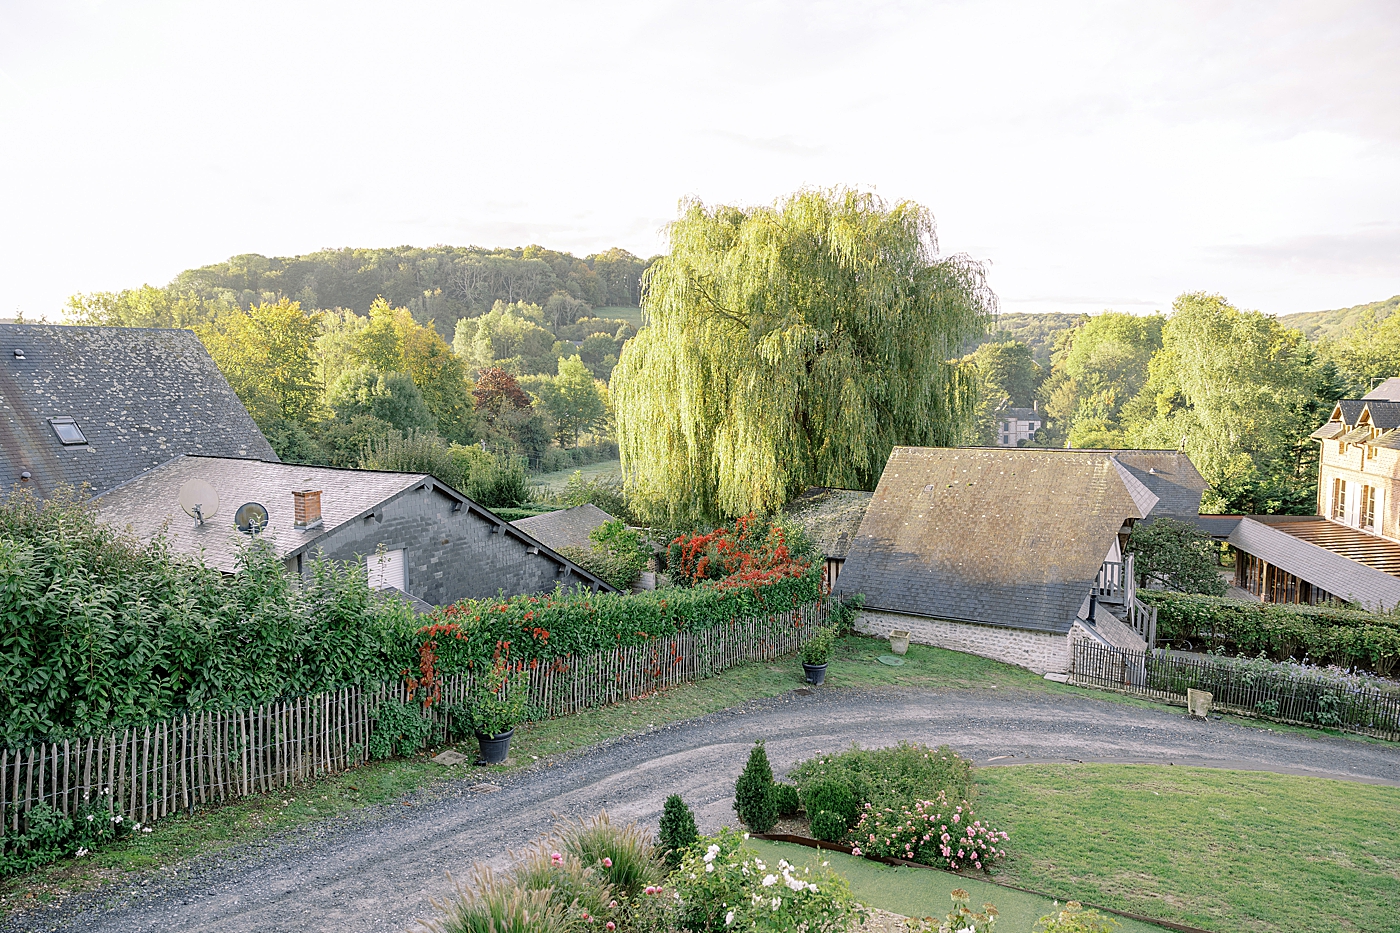 Image of a French countryside village with soft morning light | Image by Hope Helmuth Photography